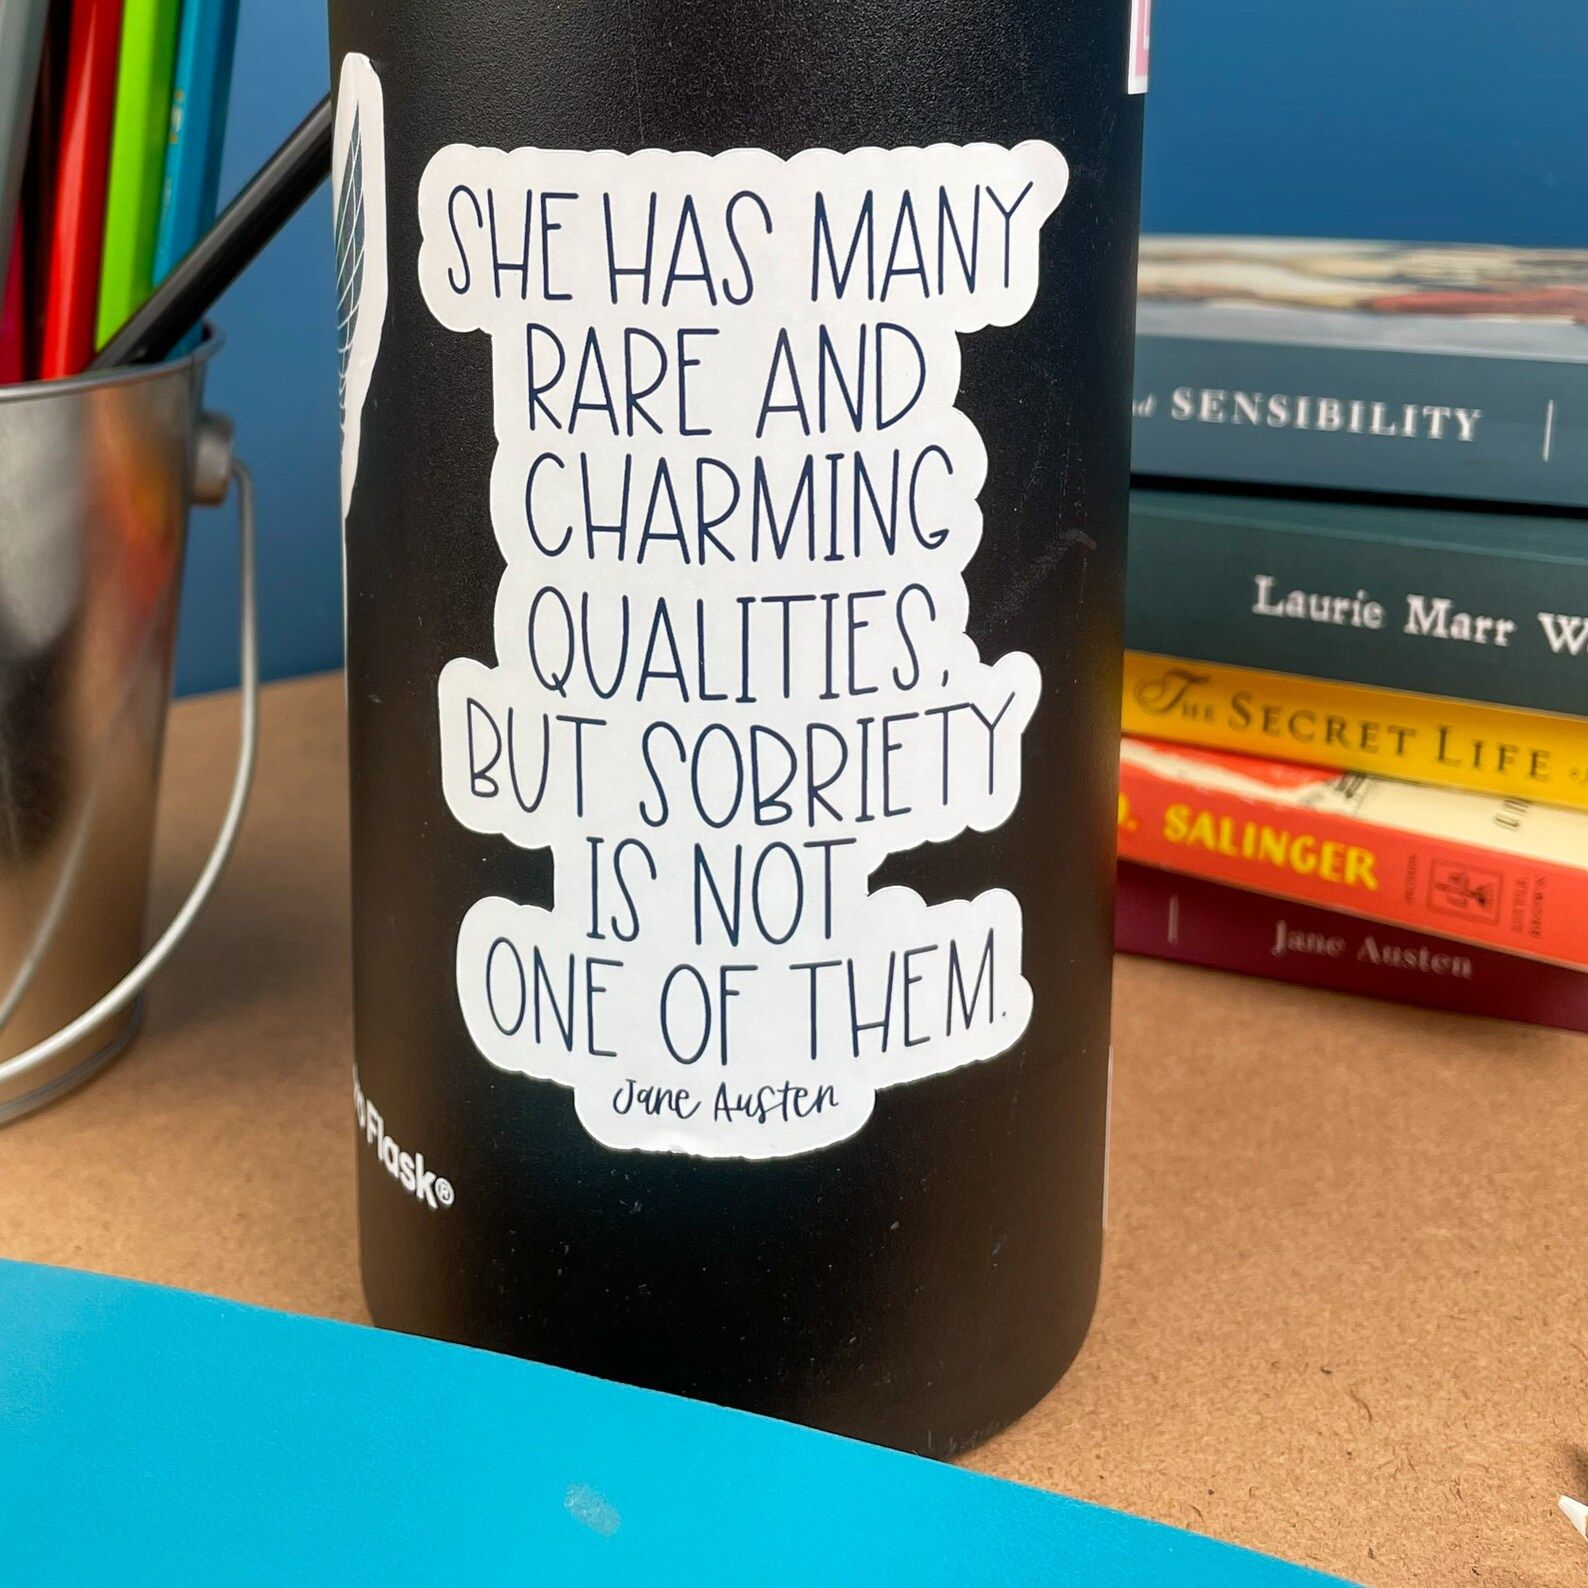 a white vinyl sticker that reads "She has many rare and charming qualities, but sobriety is not one of them"